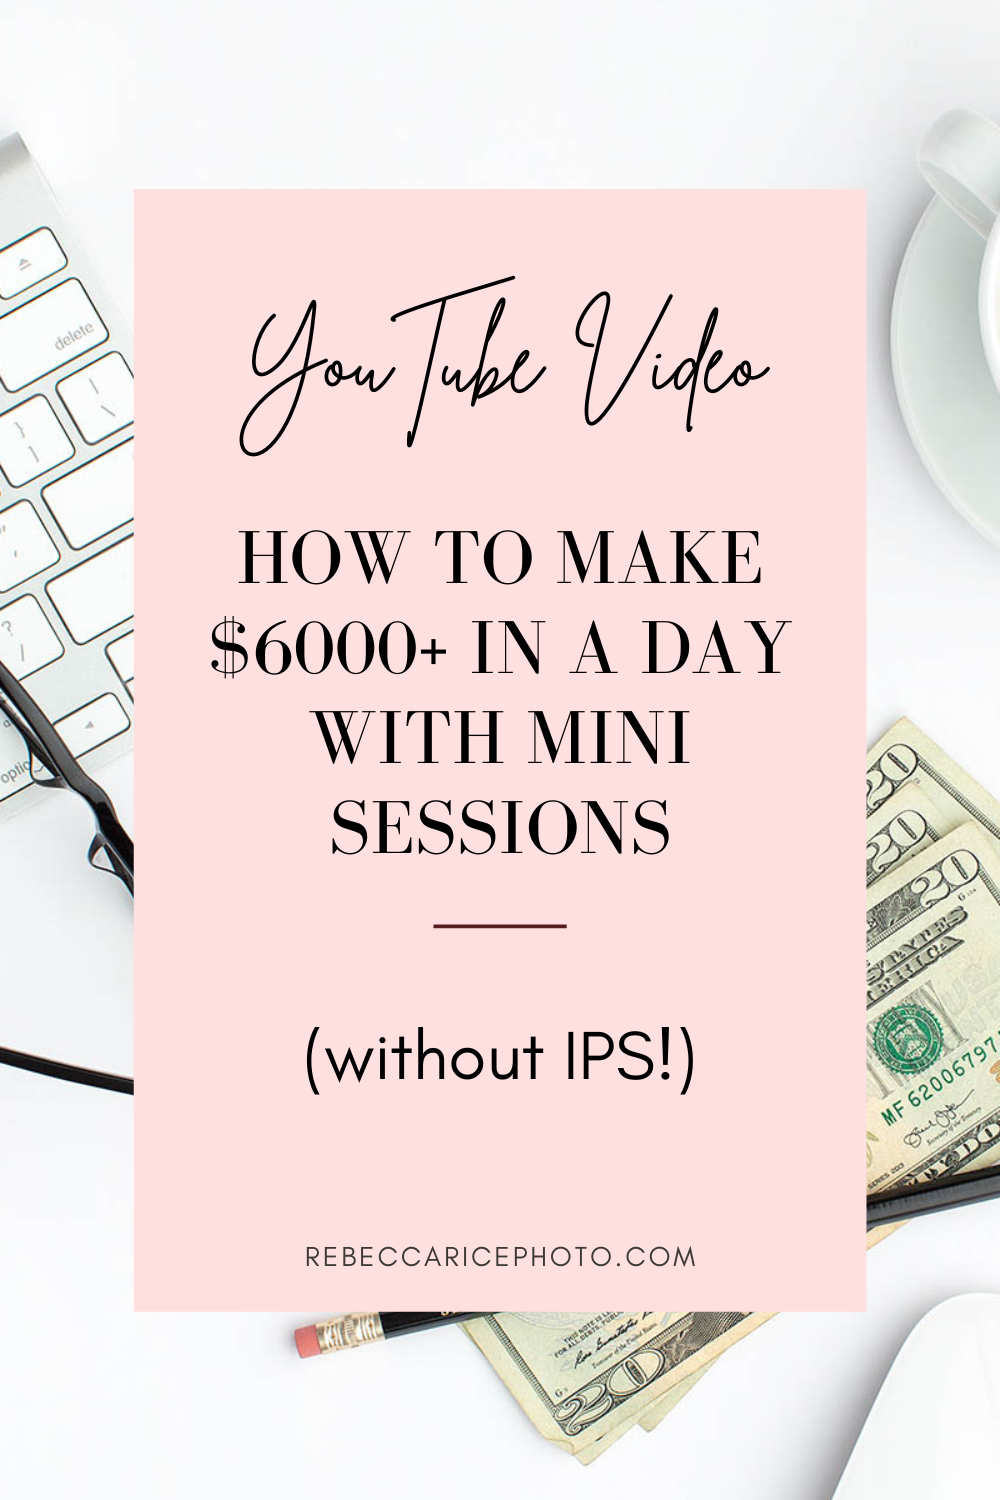 How to Make $6000+ in a Day With Mini-Sessions (without IPS!) | Mini-Sessions Tips